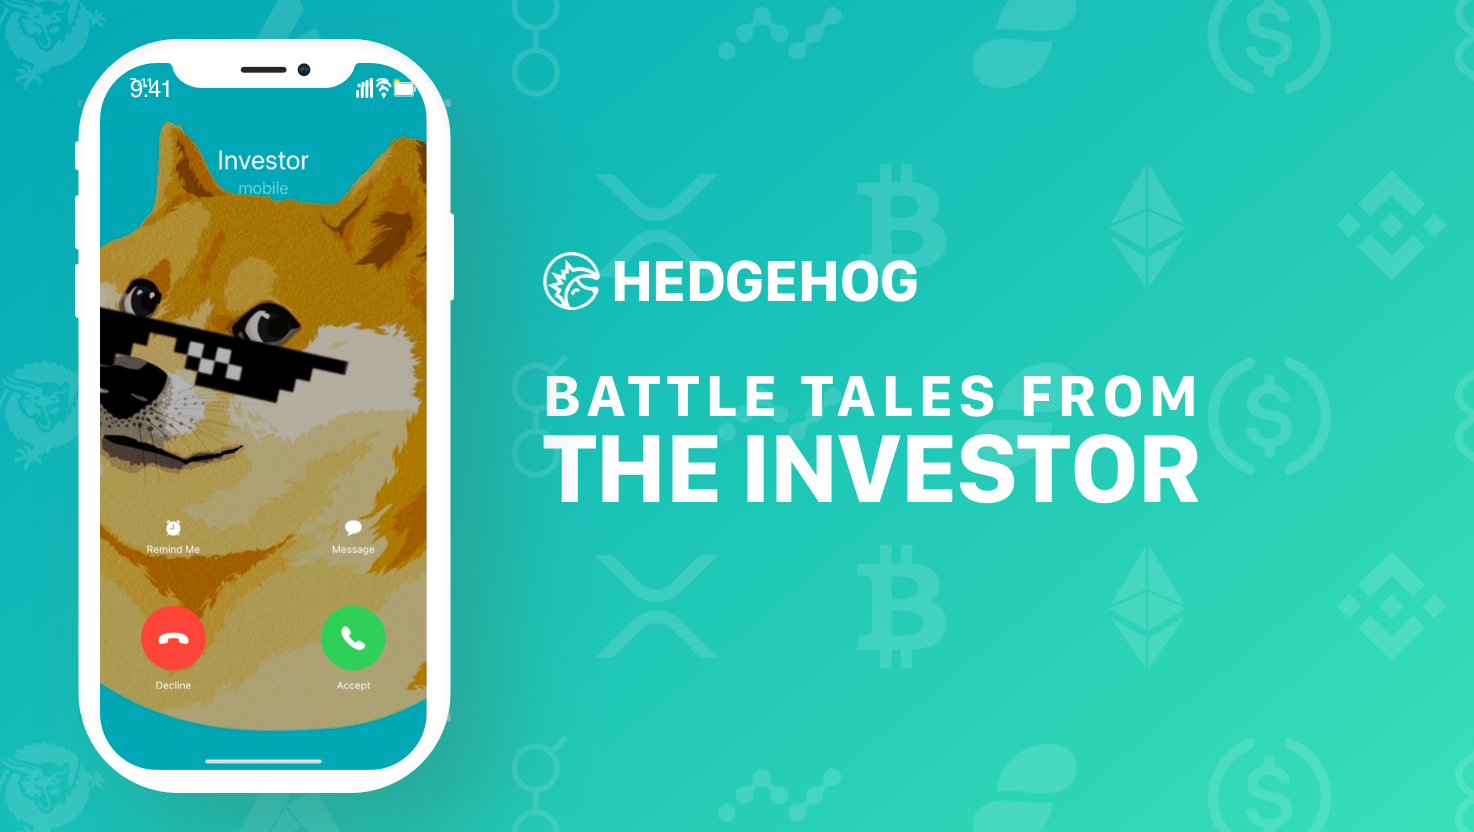 Investor is the chat nickname of Ricky Lobel, Hedgehog's first non-family investor. It's an accurate label! Gonna label the Lobel? Gotta do it right. 